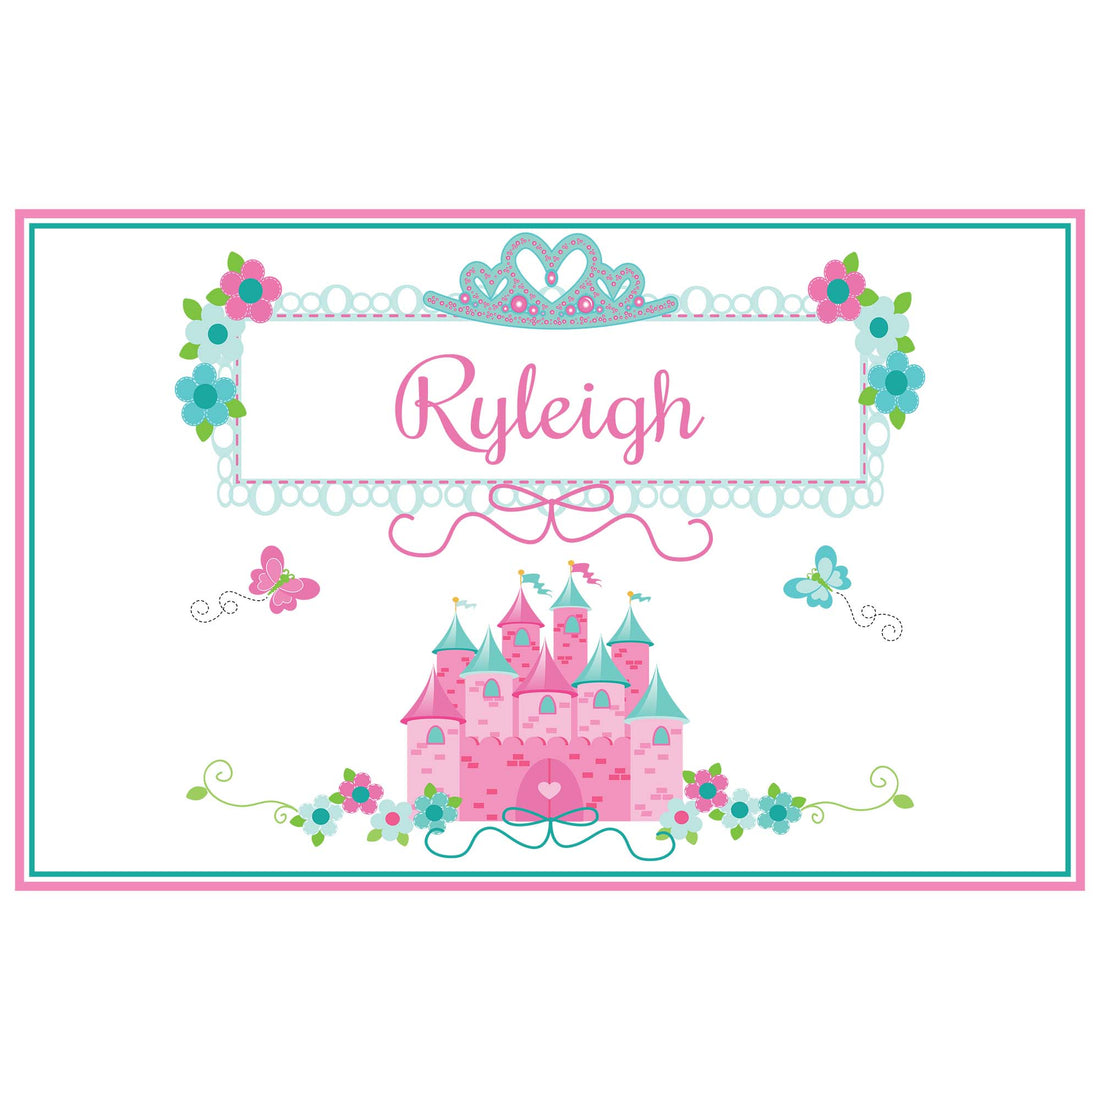 Personalized Placemat with Pink Teal Princess Castle design